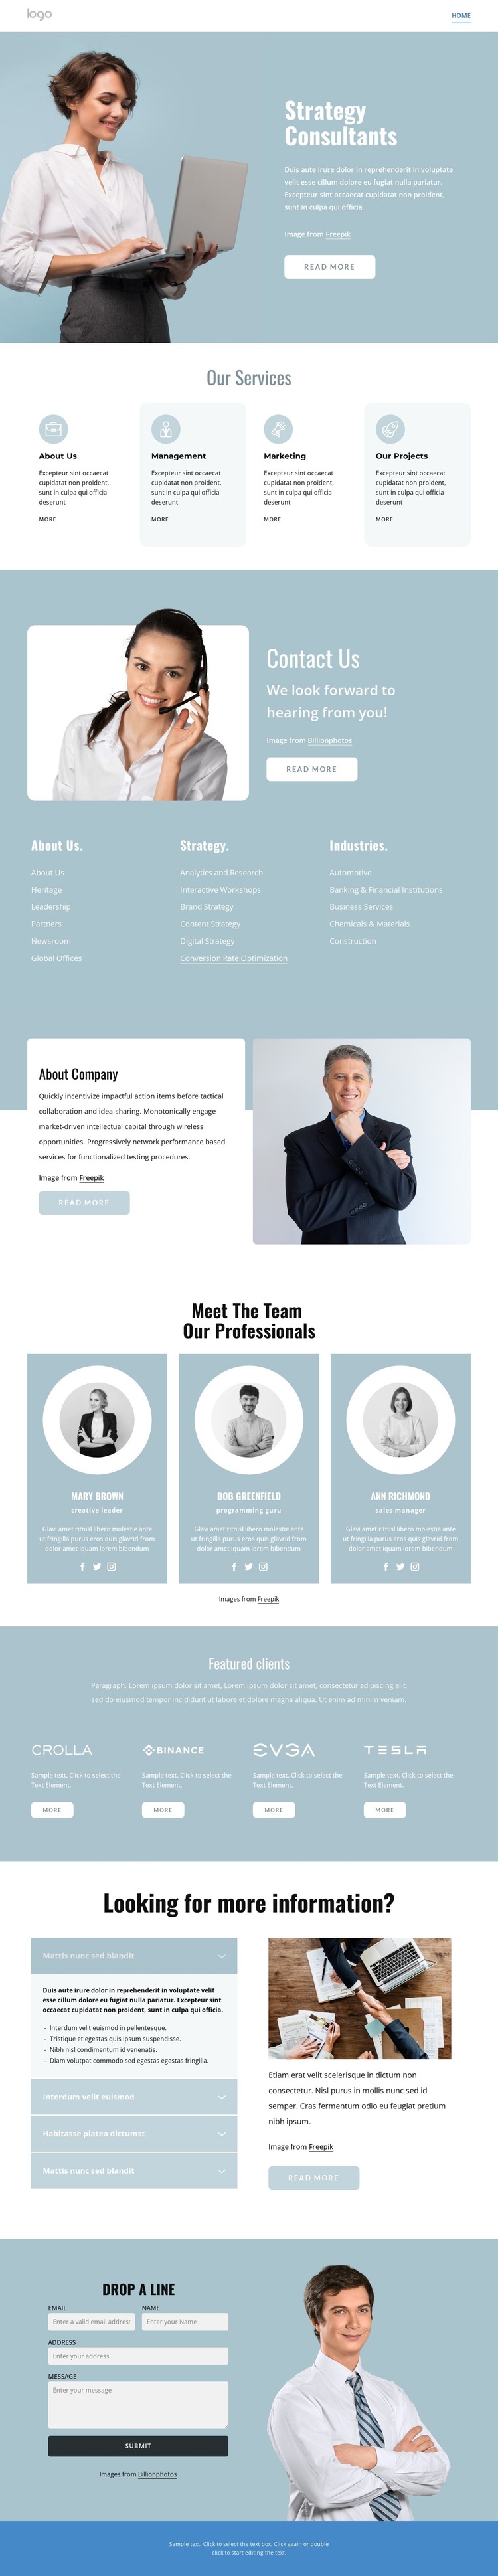 Strategy connsultants HTML5 Template